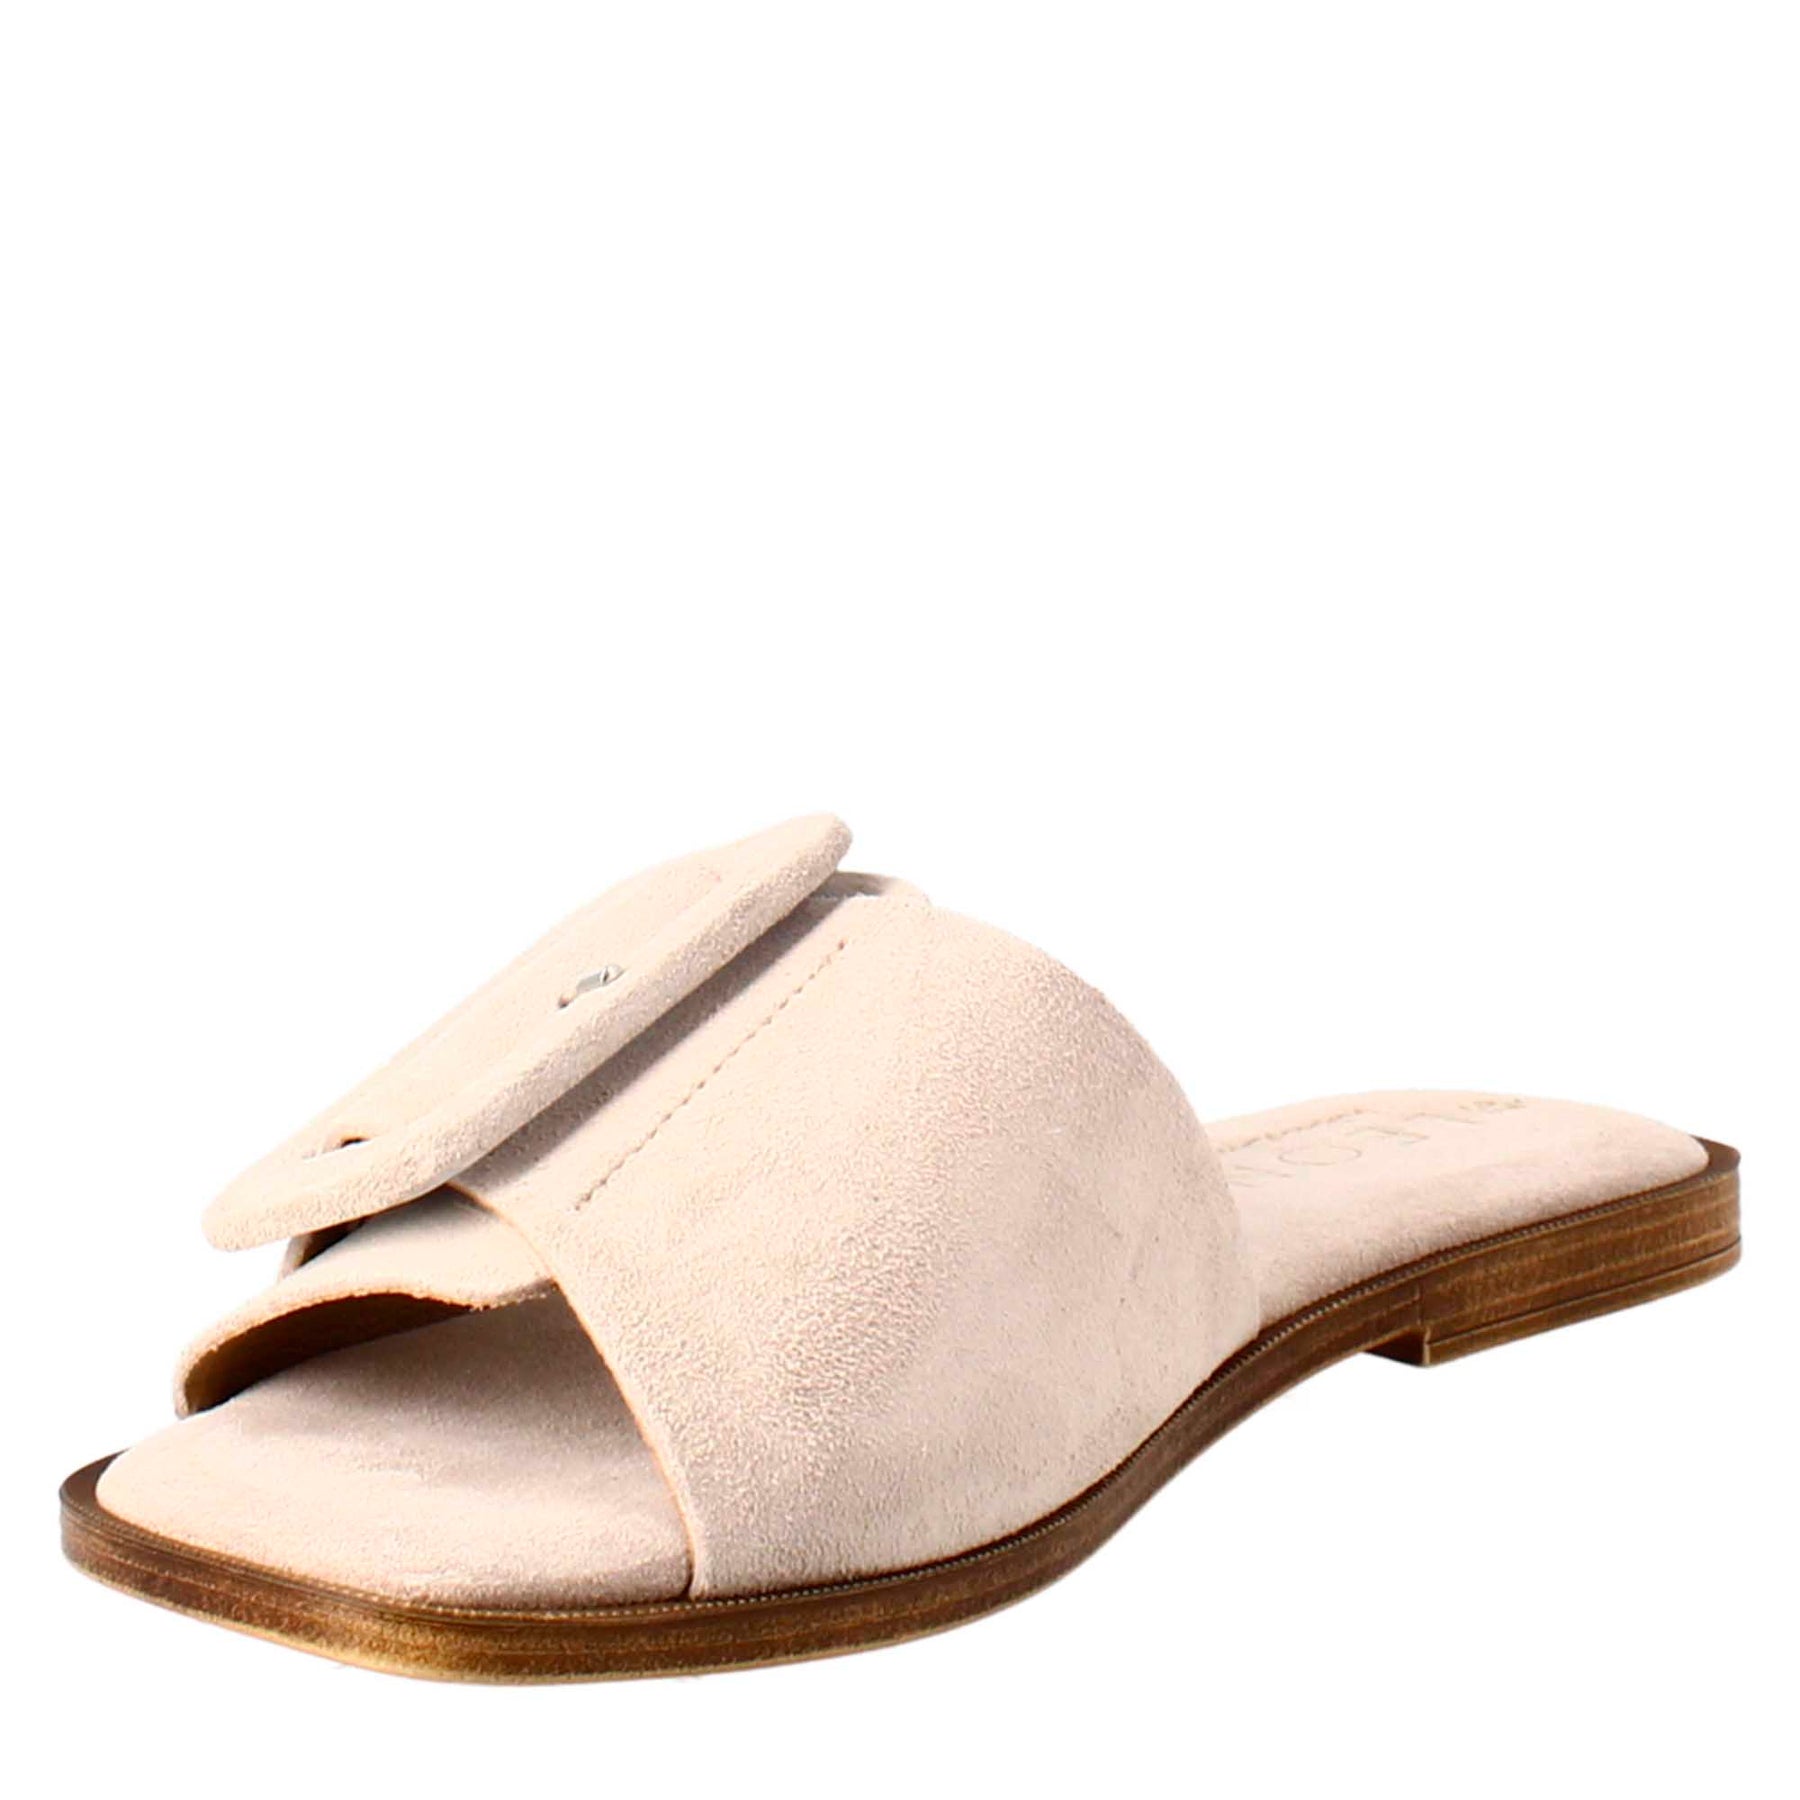 Low sandal for woman in beige suede